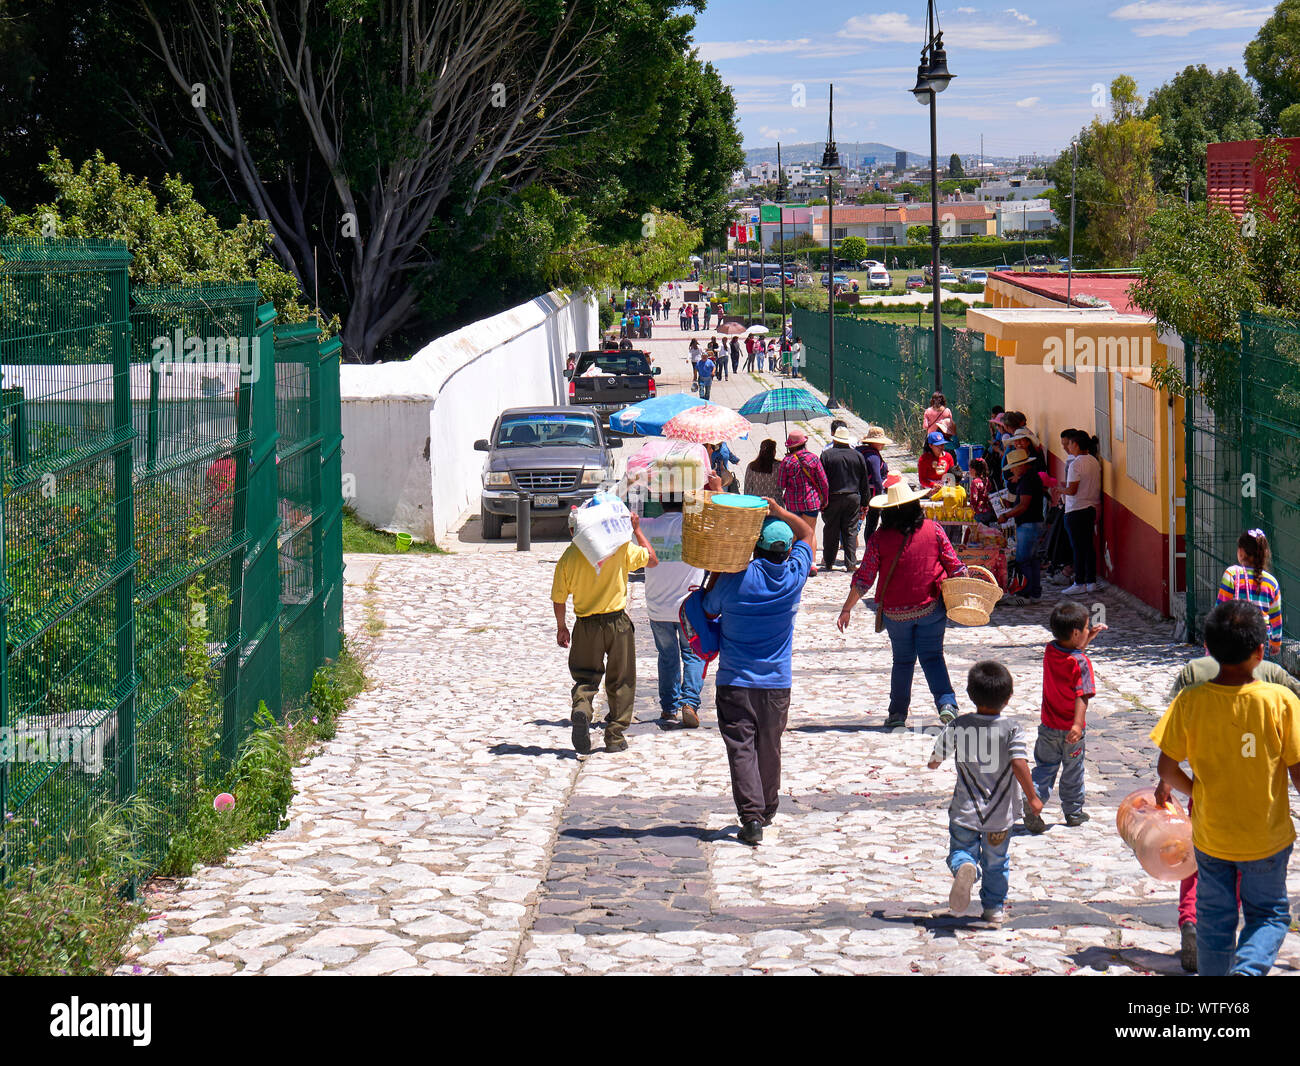 San Andres Cholula, Mexico, September 30, 2018 - People who work and tourists walk along the Calle 8 Pte street that descends from the Shrine of Our Lady of Remedies. Stock Photo